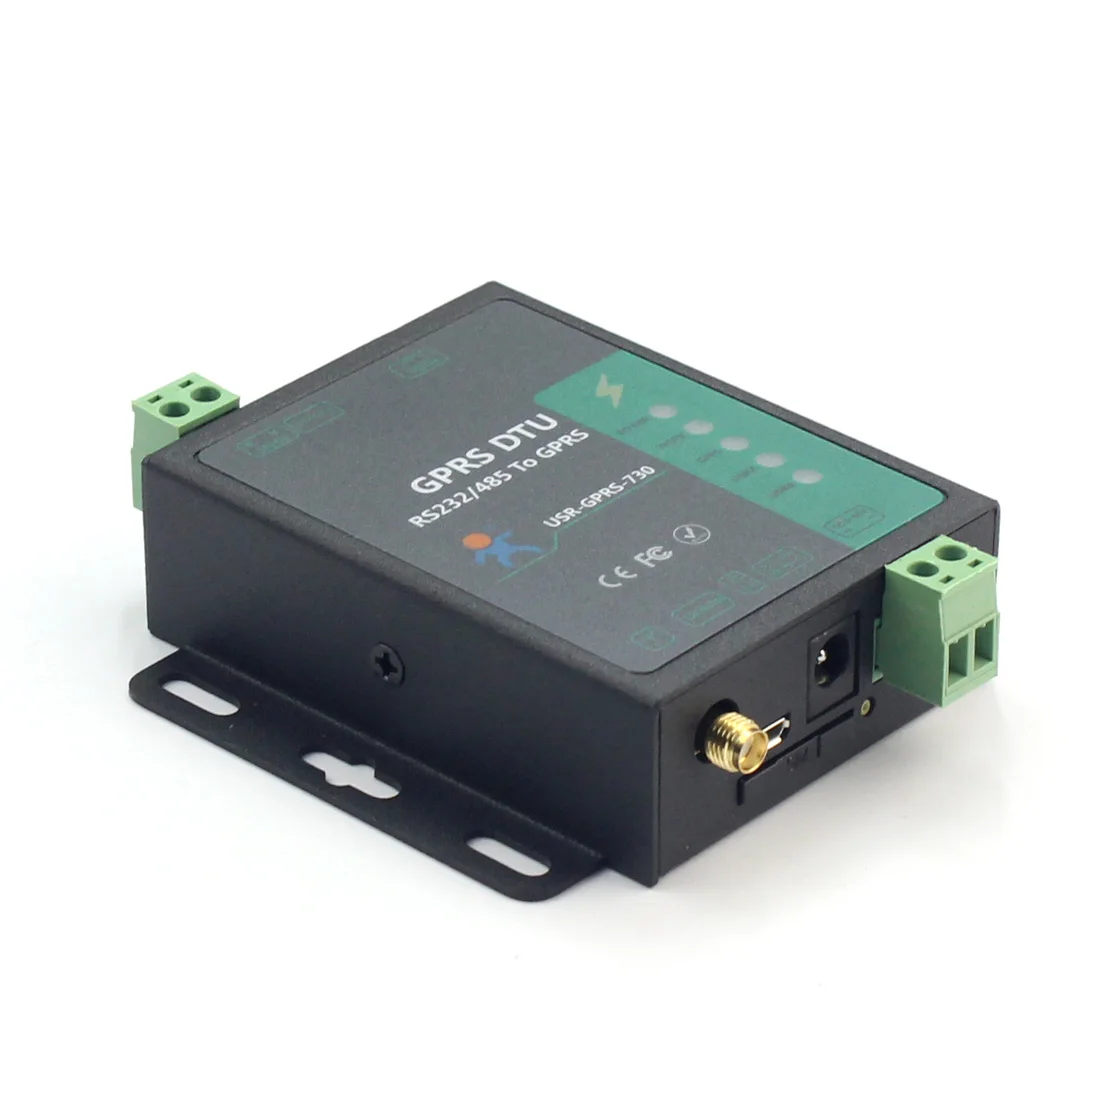 

USR-GPRS232-730 RS232 / RS485 GSM Modems Support GSM/GPRS GPRS to Serial Converter DTU Flow Control RTS CTS